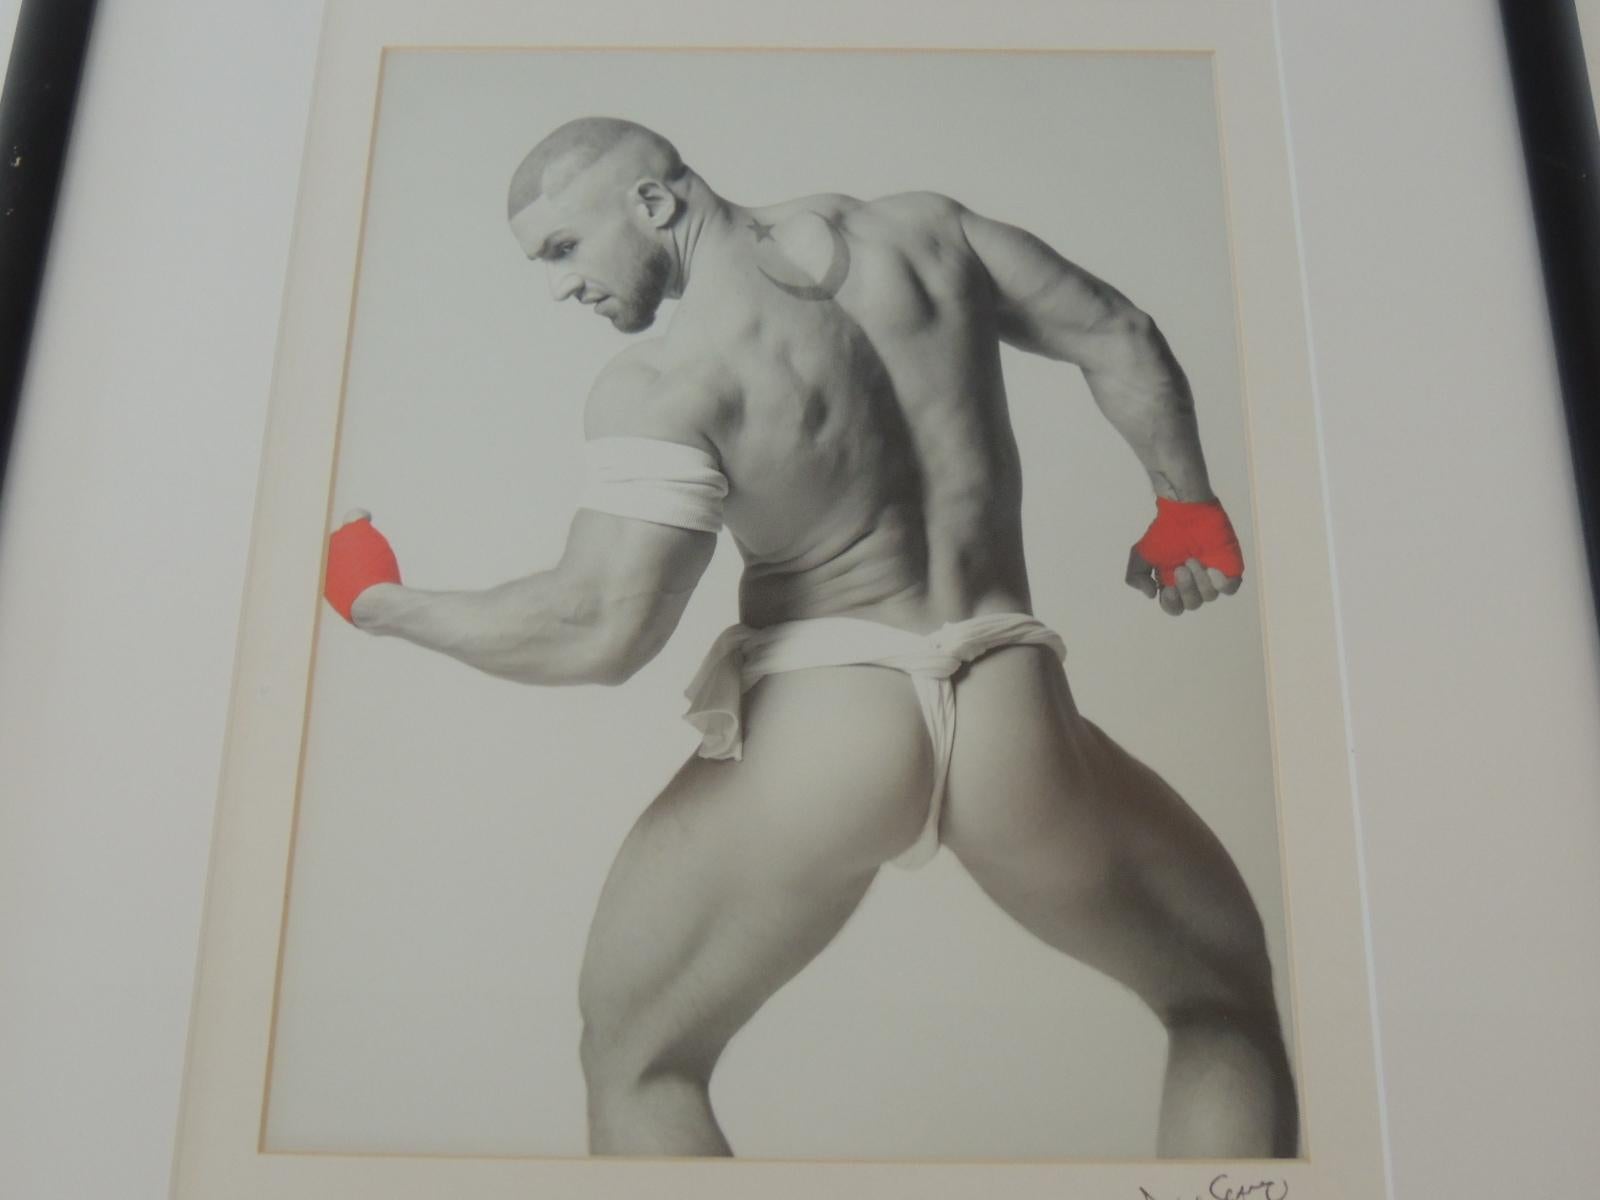 Nude black and white abstract photograph of male with red gloves.
aka. Adult film star Francois Sagat.
Black vintage lacquered wood frame and museum quality white mat.
(glass)
Found in Orlando Florida. (Local Photographer)
Size of photo: 8